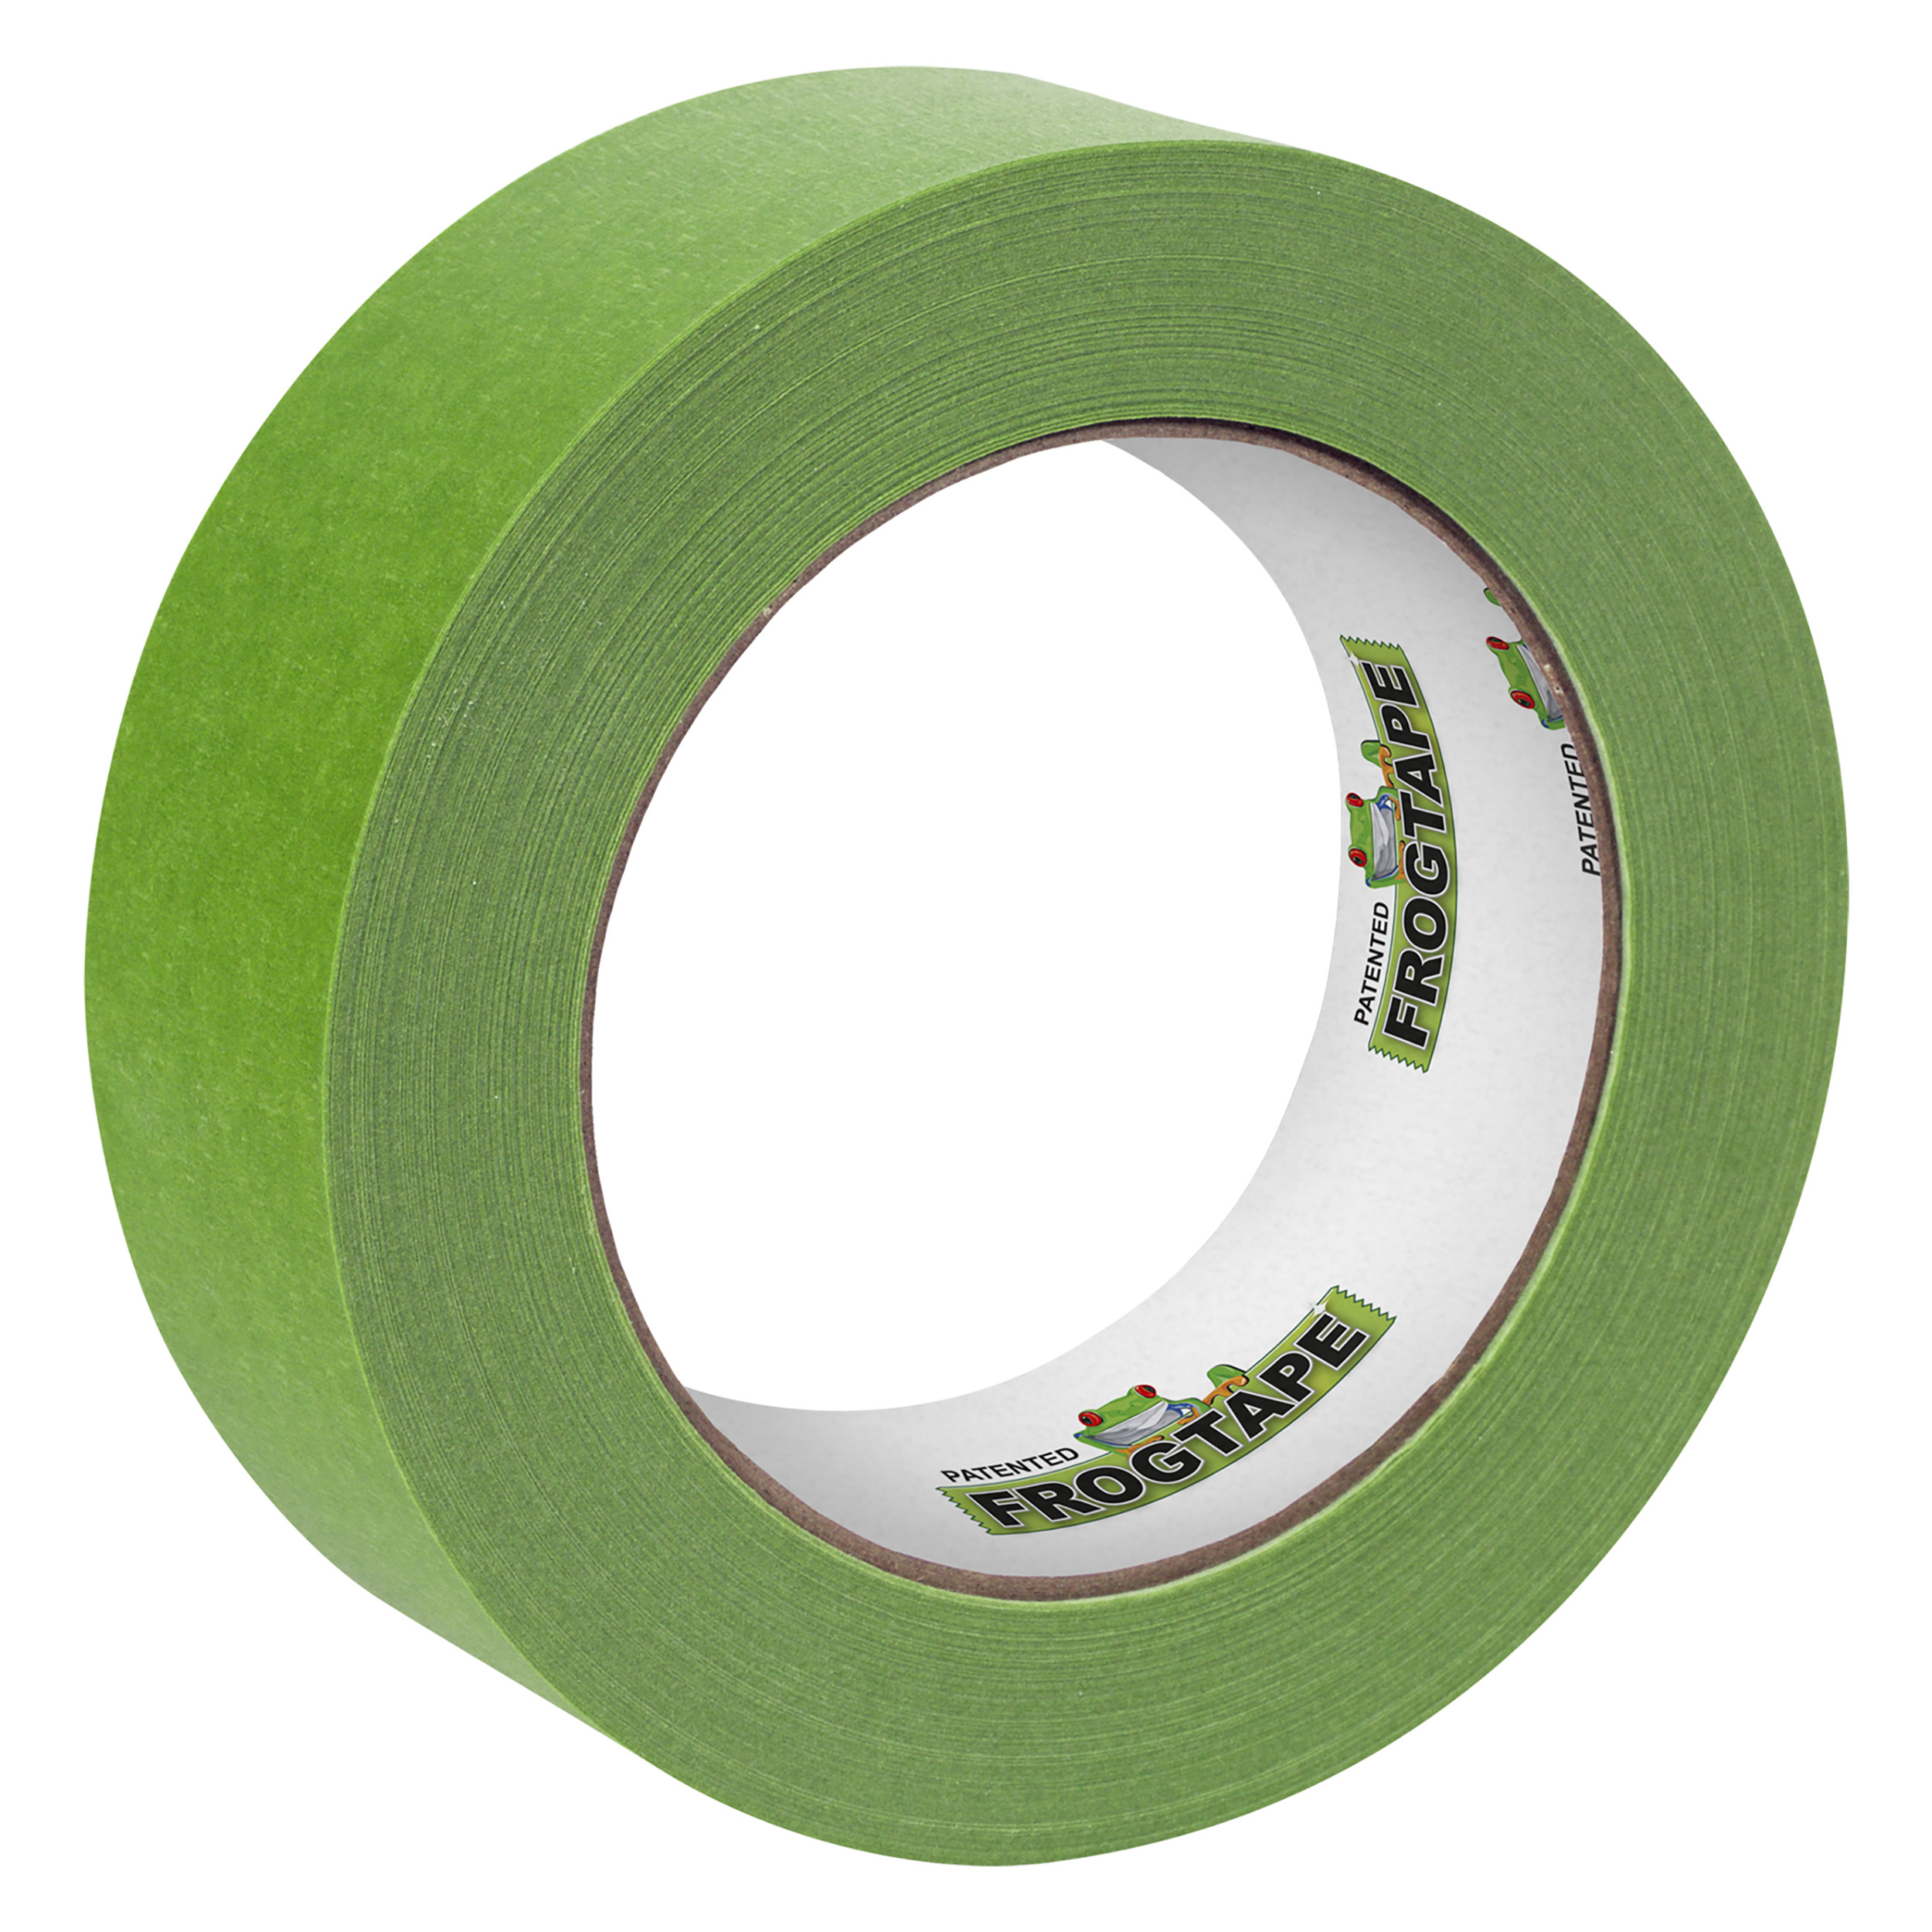 20.503.06 Frogtape  multi surface - 36 mm x 41.1 m